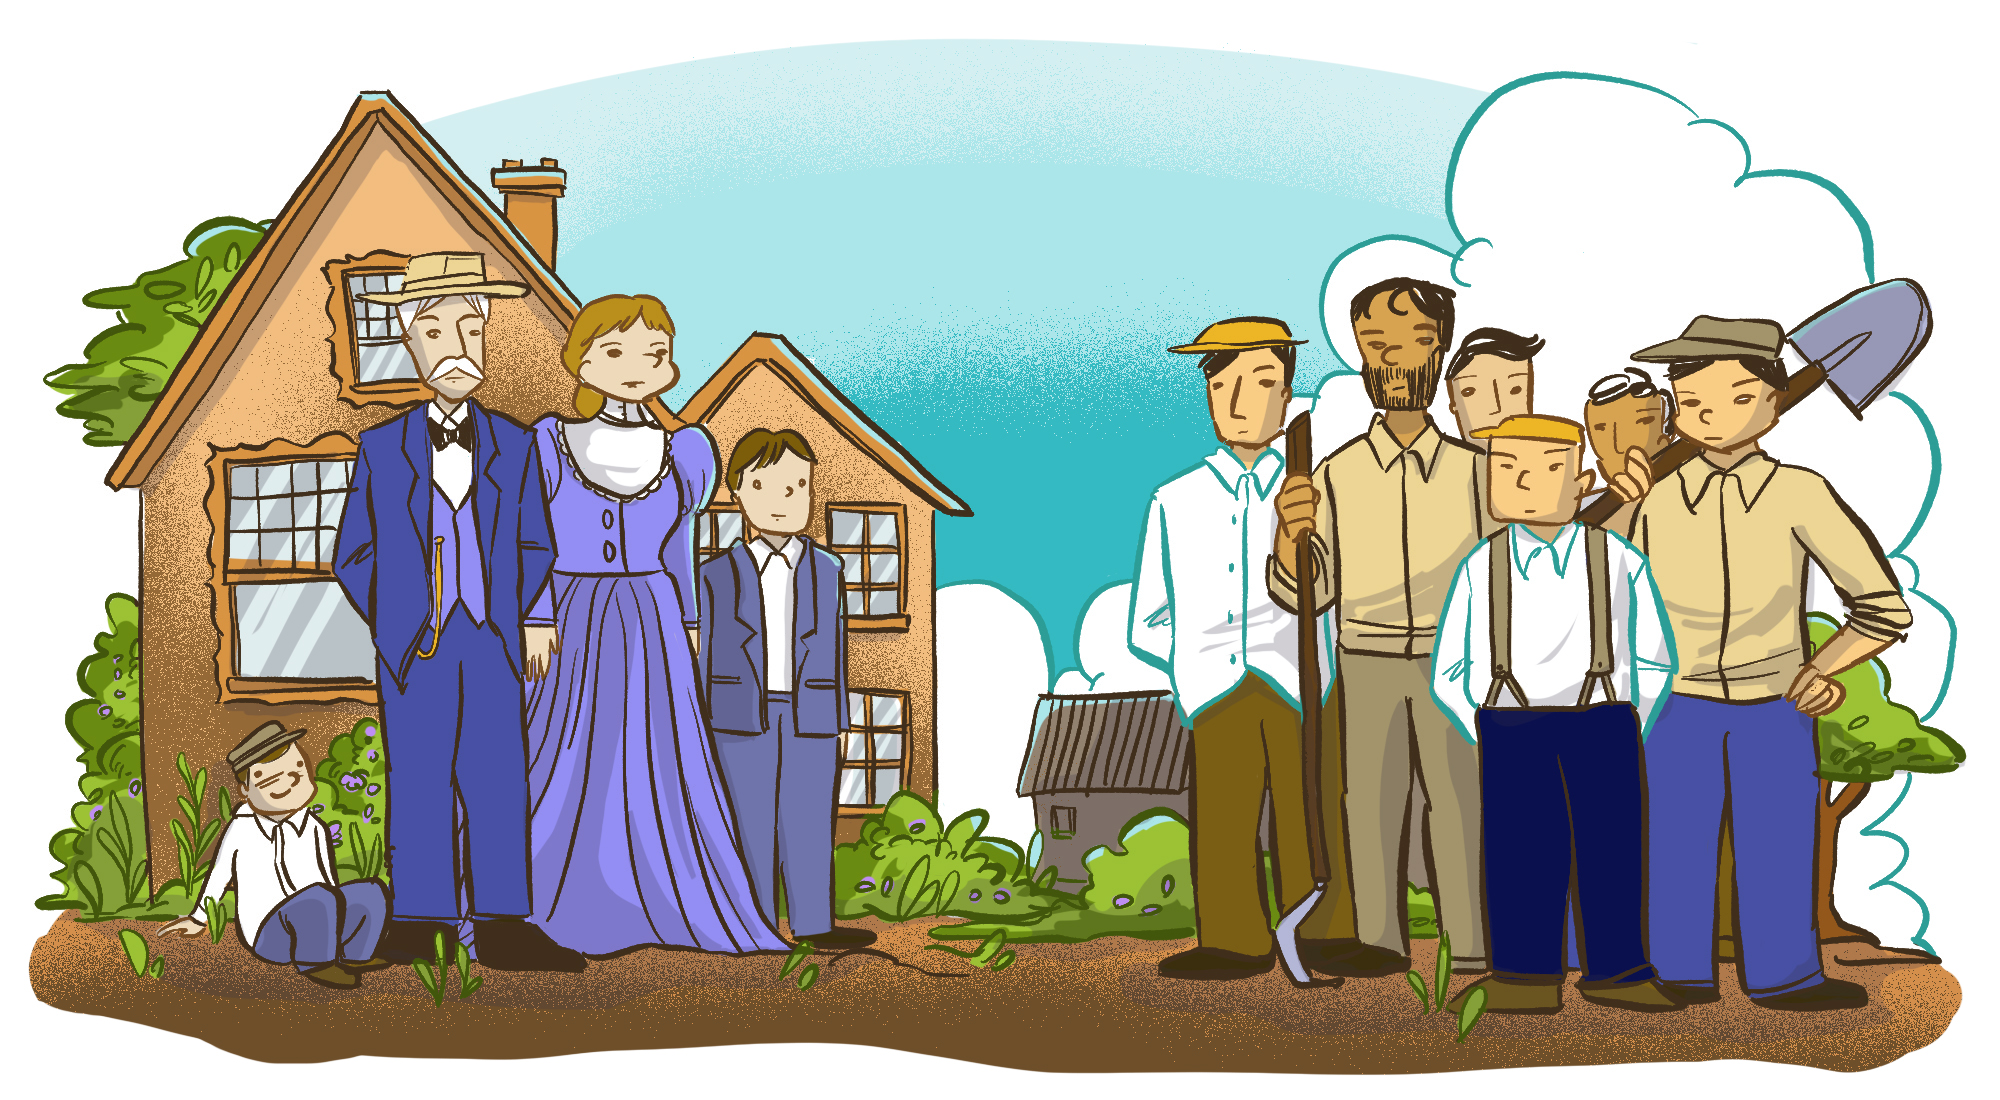 An illustration of Chinese tenant farmers and Caucasian farm owners. On the right hand side of the image stands several Chinese Canadian farmers with farming tools in their hands, against a background of farm land. On the left hand side stands a family of Caucasian farm owners in front of their house.